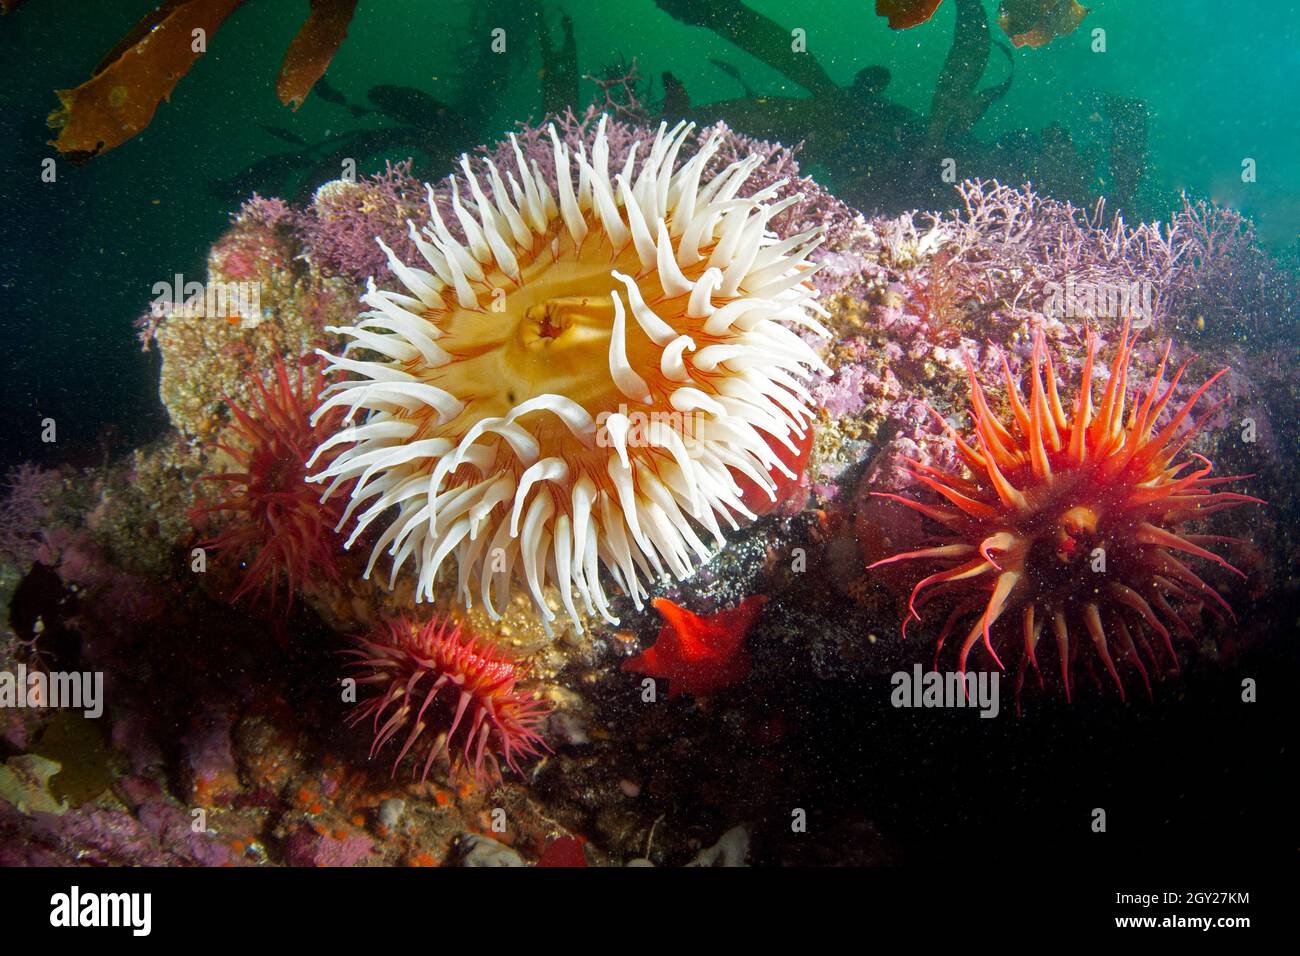 Painted or Christmas anemone, Urticina grebelnyi, Point Lobos State Natural Reserve, California, USA Stock Photo